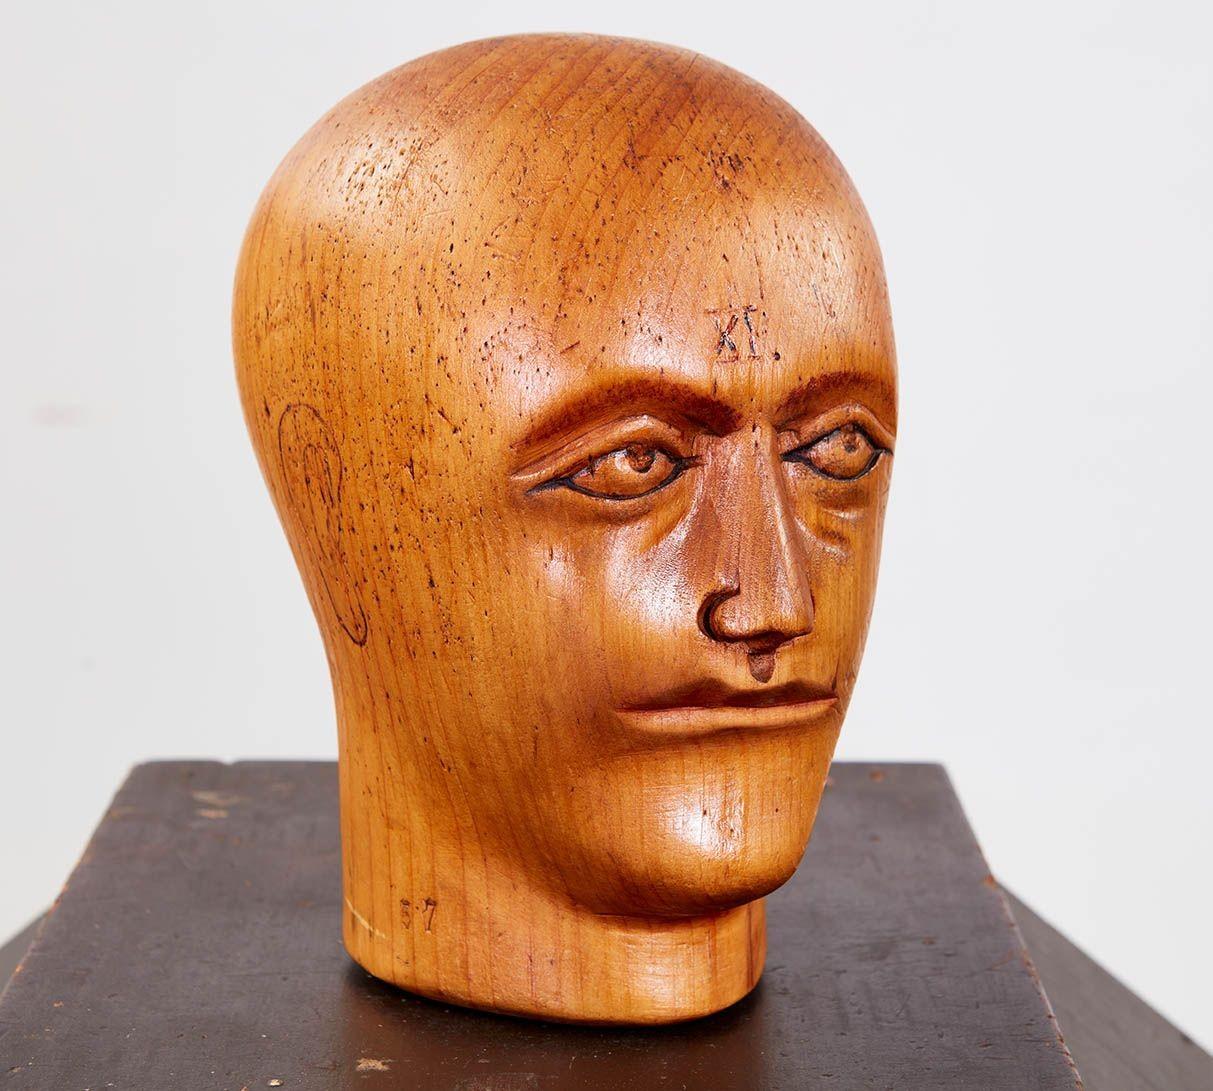 A wooden mannequin head, probably a toupe stand, with good color and a well-carved idiosyncratic and compelling face, having laconic eyes and with what might be chewing tobacco in his upper right lip.  Roman numerals XI stamped above the bridge of